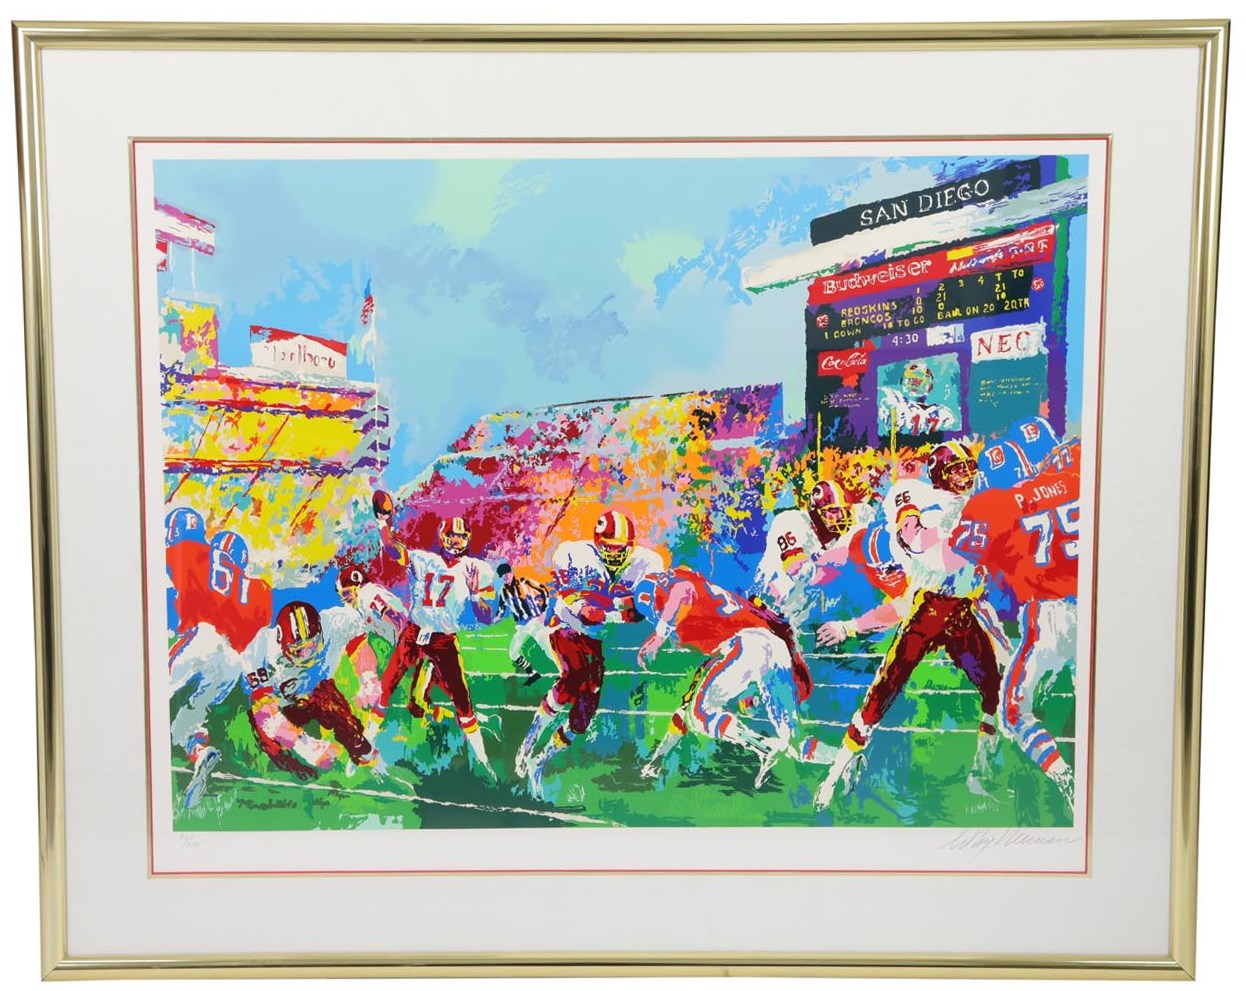 - 1988 LeRoy Neiman Signed "In the Pocket" Serigraph